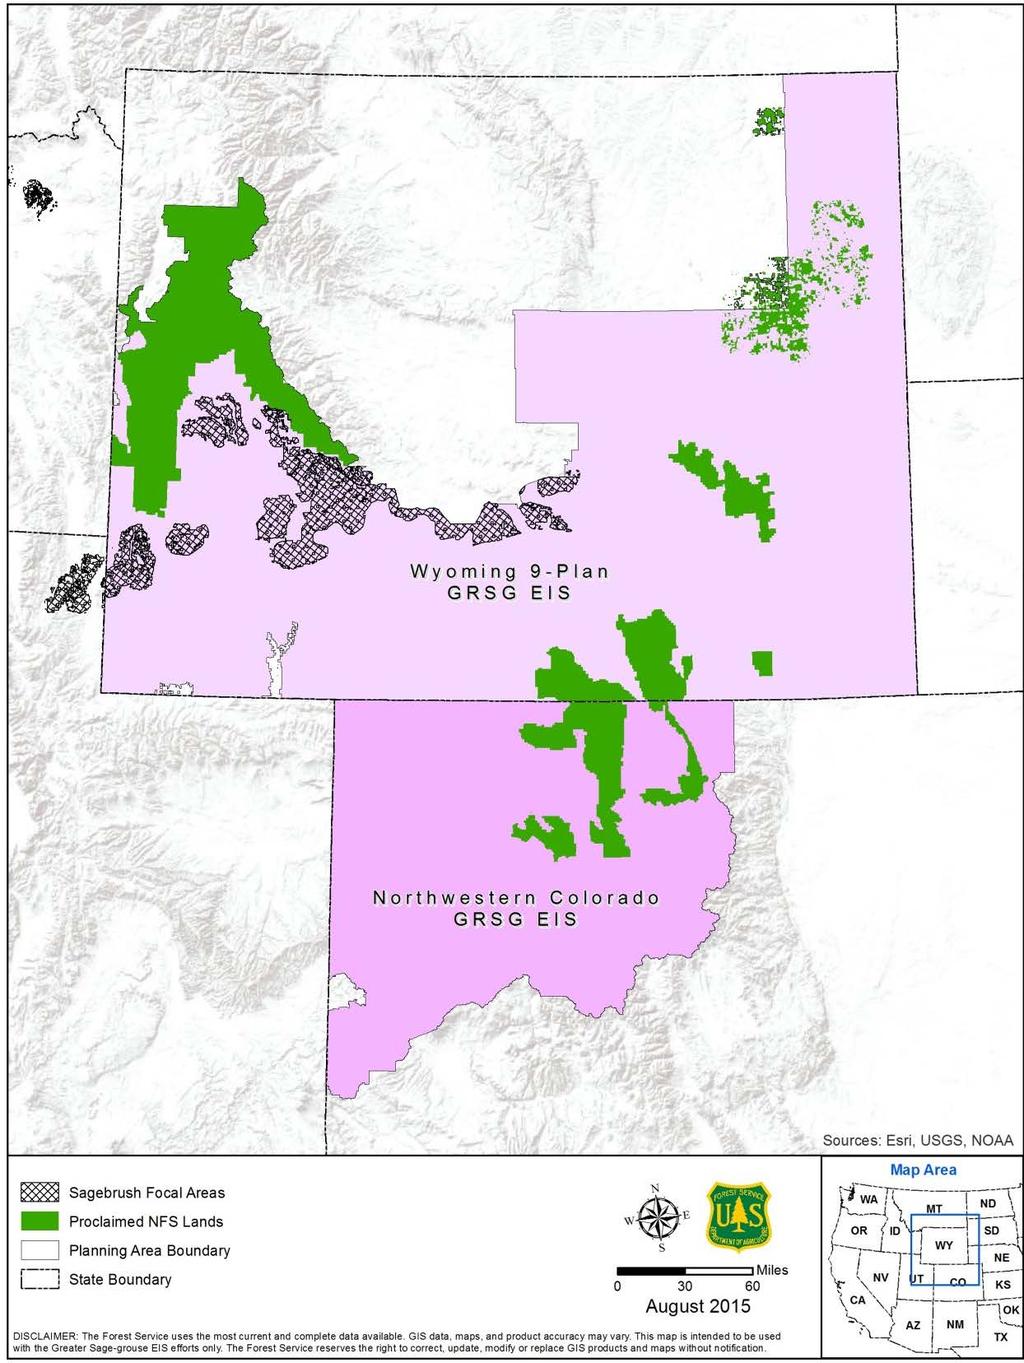 The decision area also includes sagebrush focal areas (SF